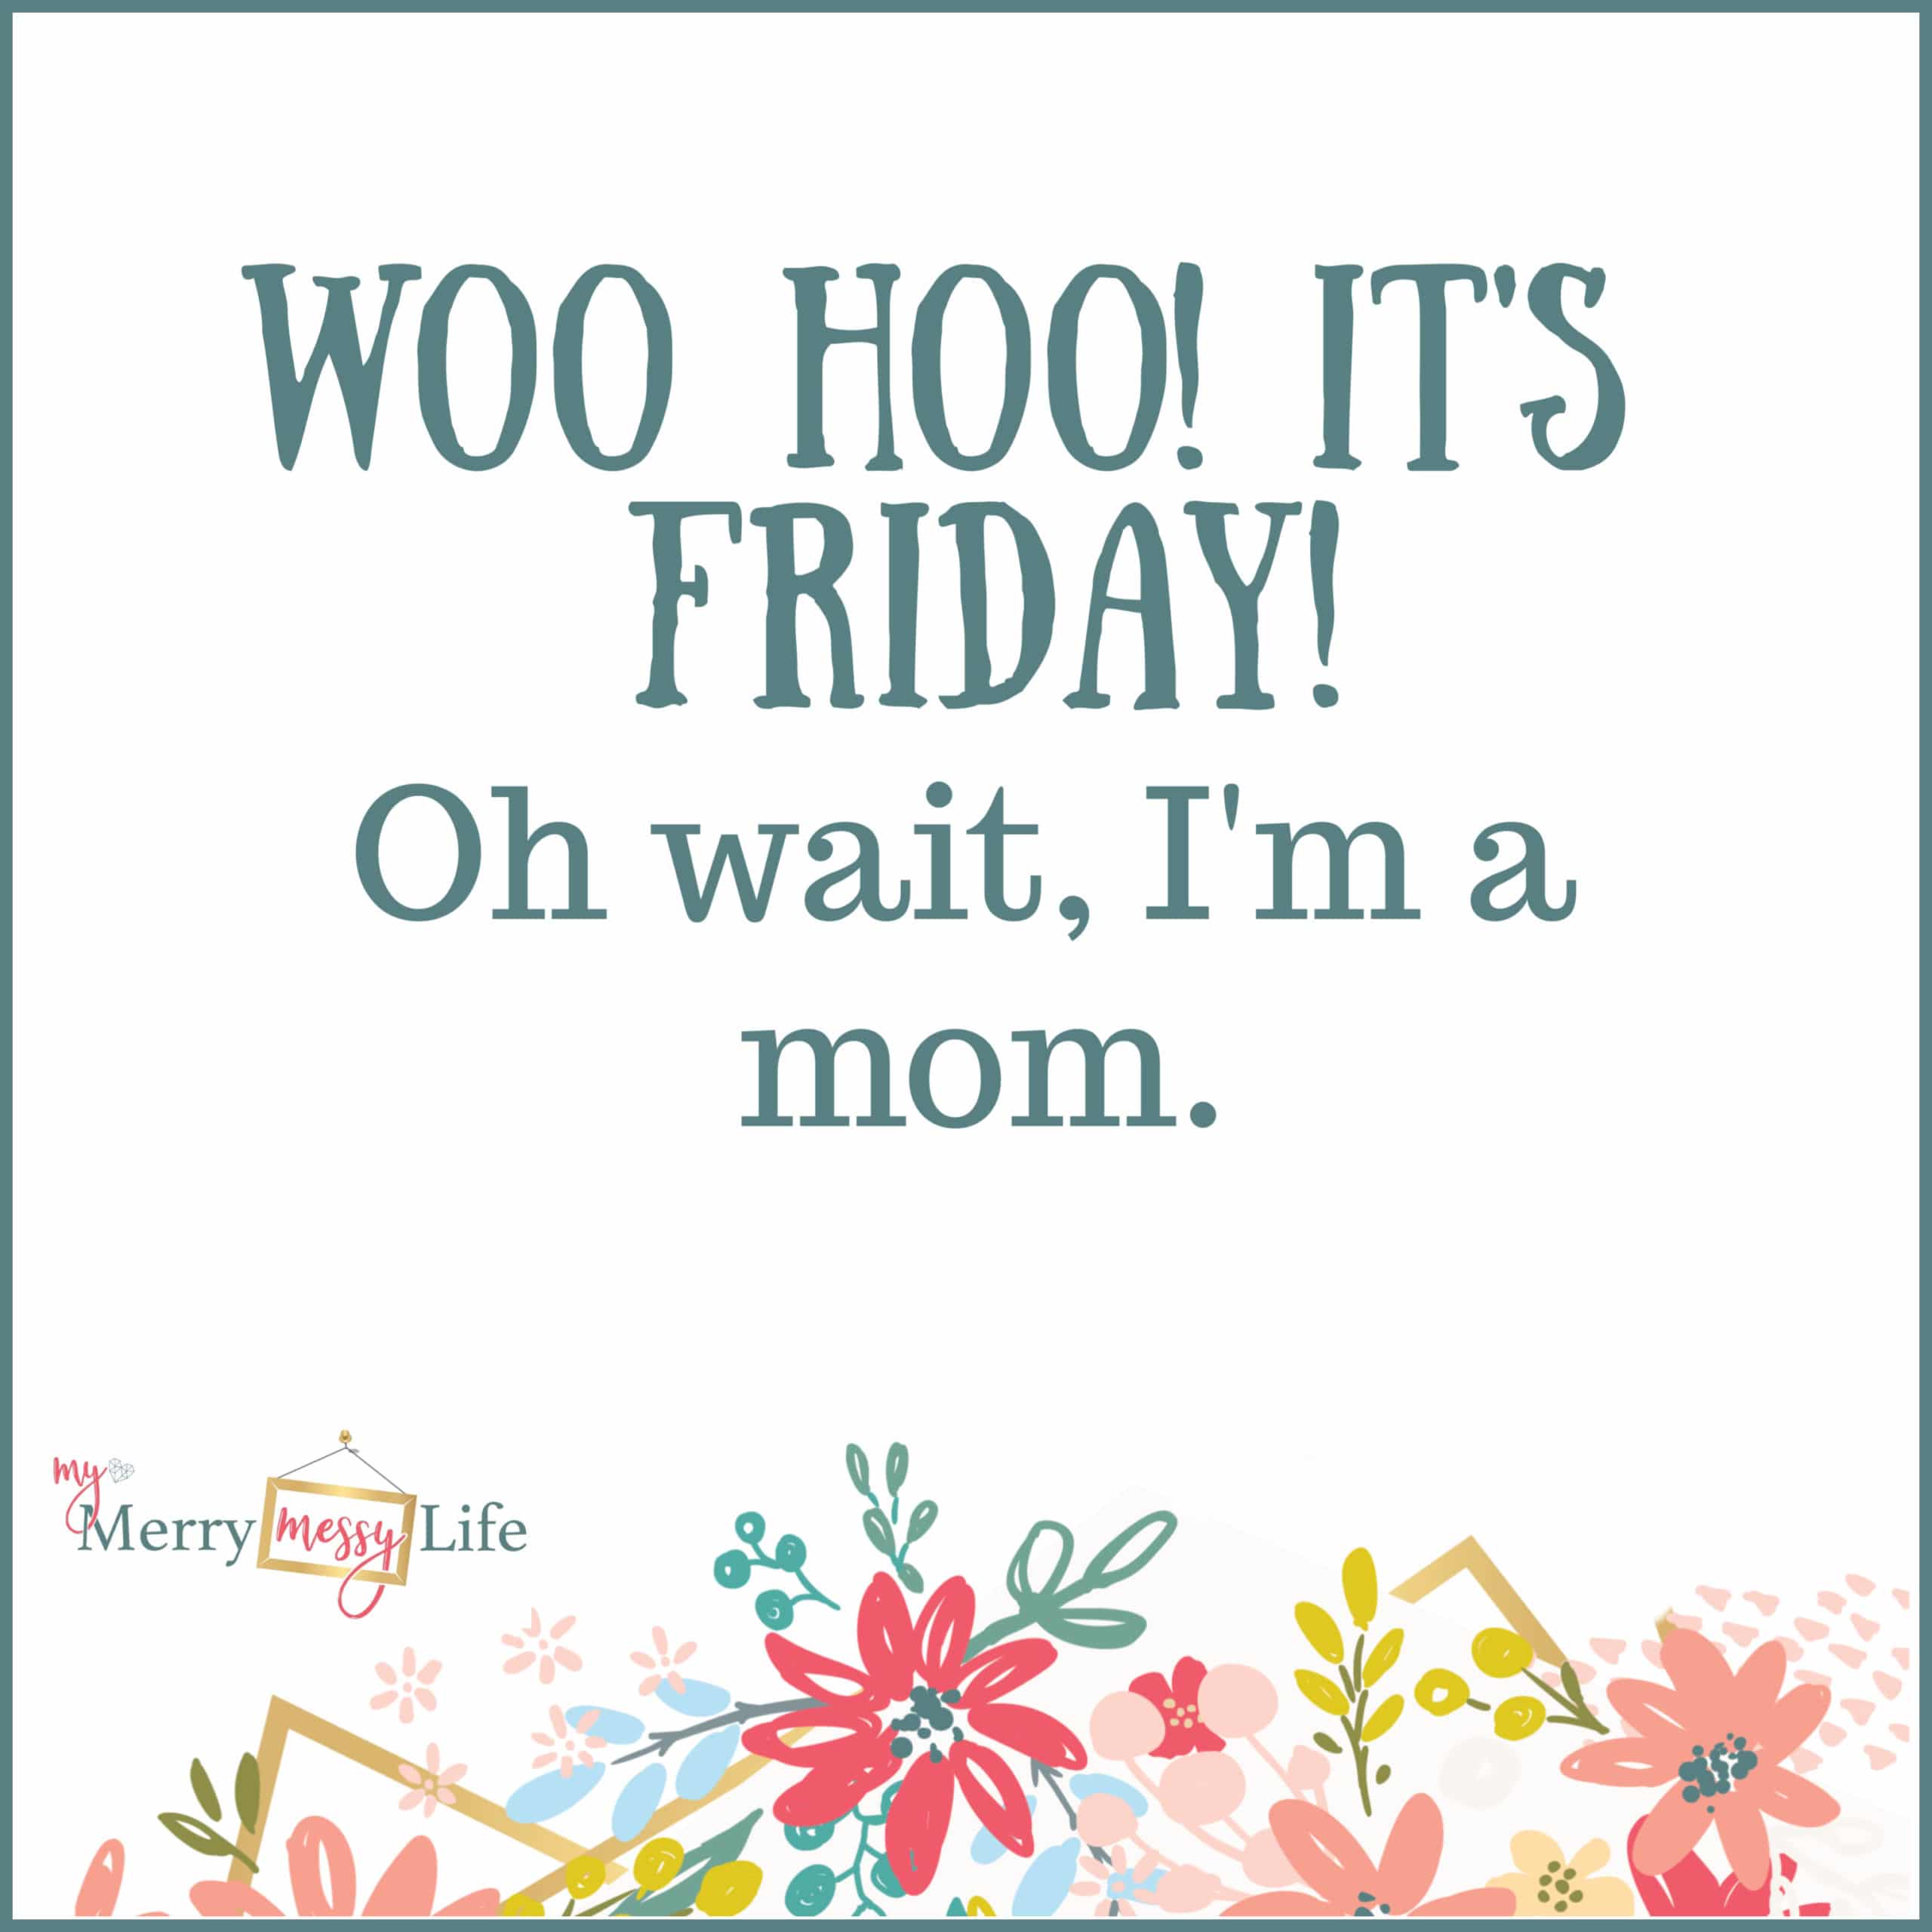 Woohoo! It's Friday! Oh wait, I'm a mom. - Funny Mom Memes about Baby Life